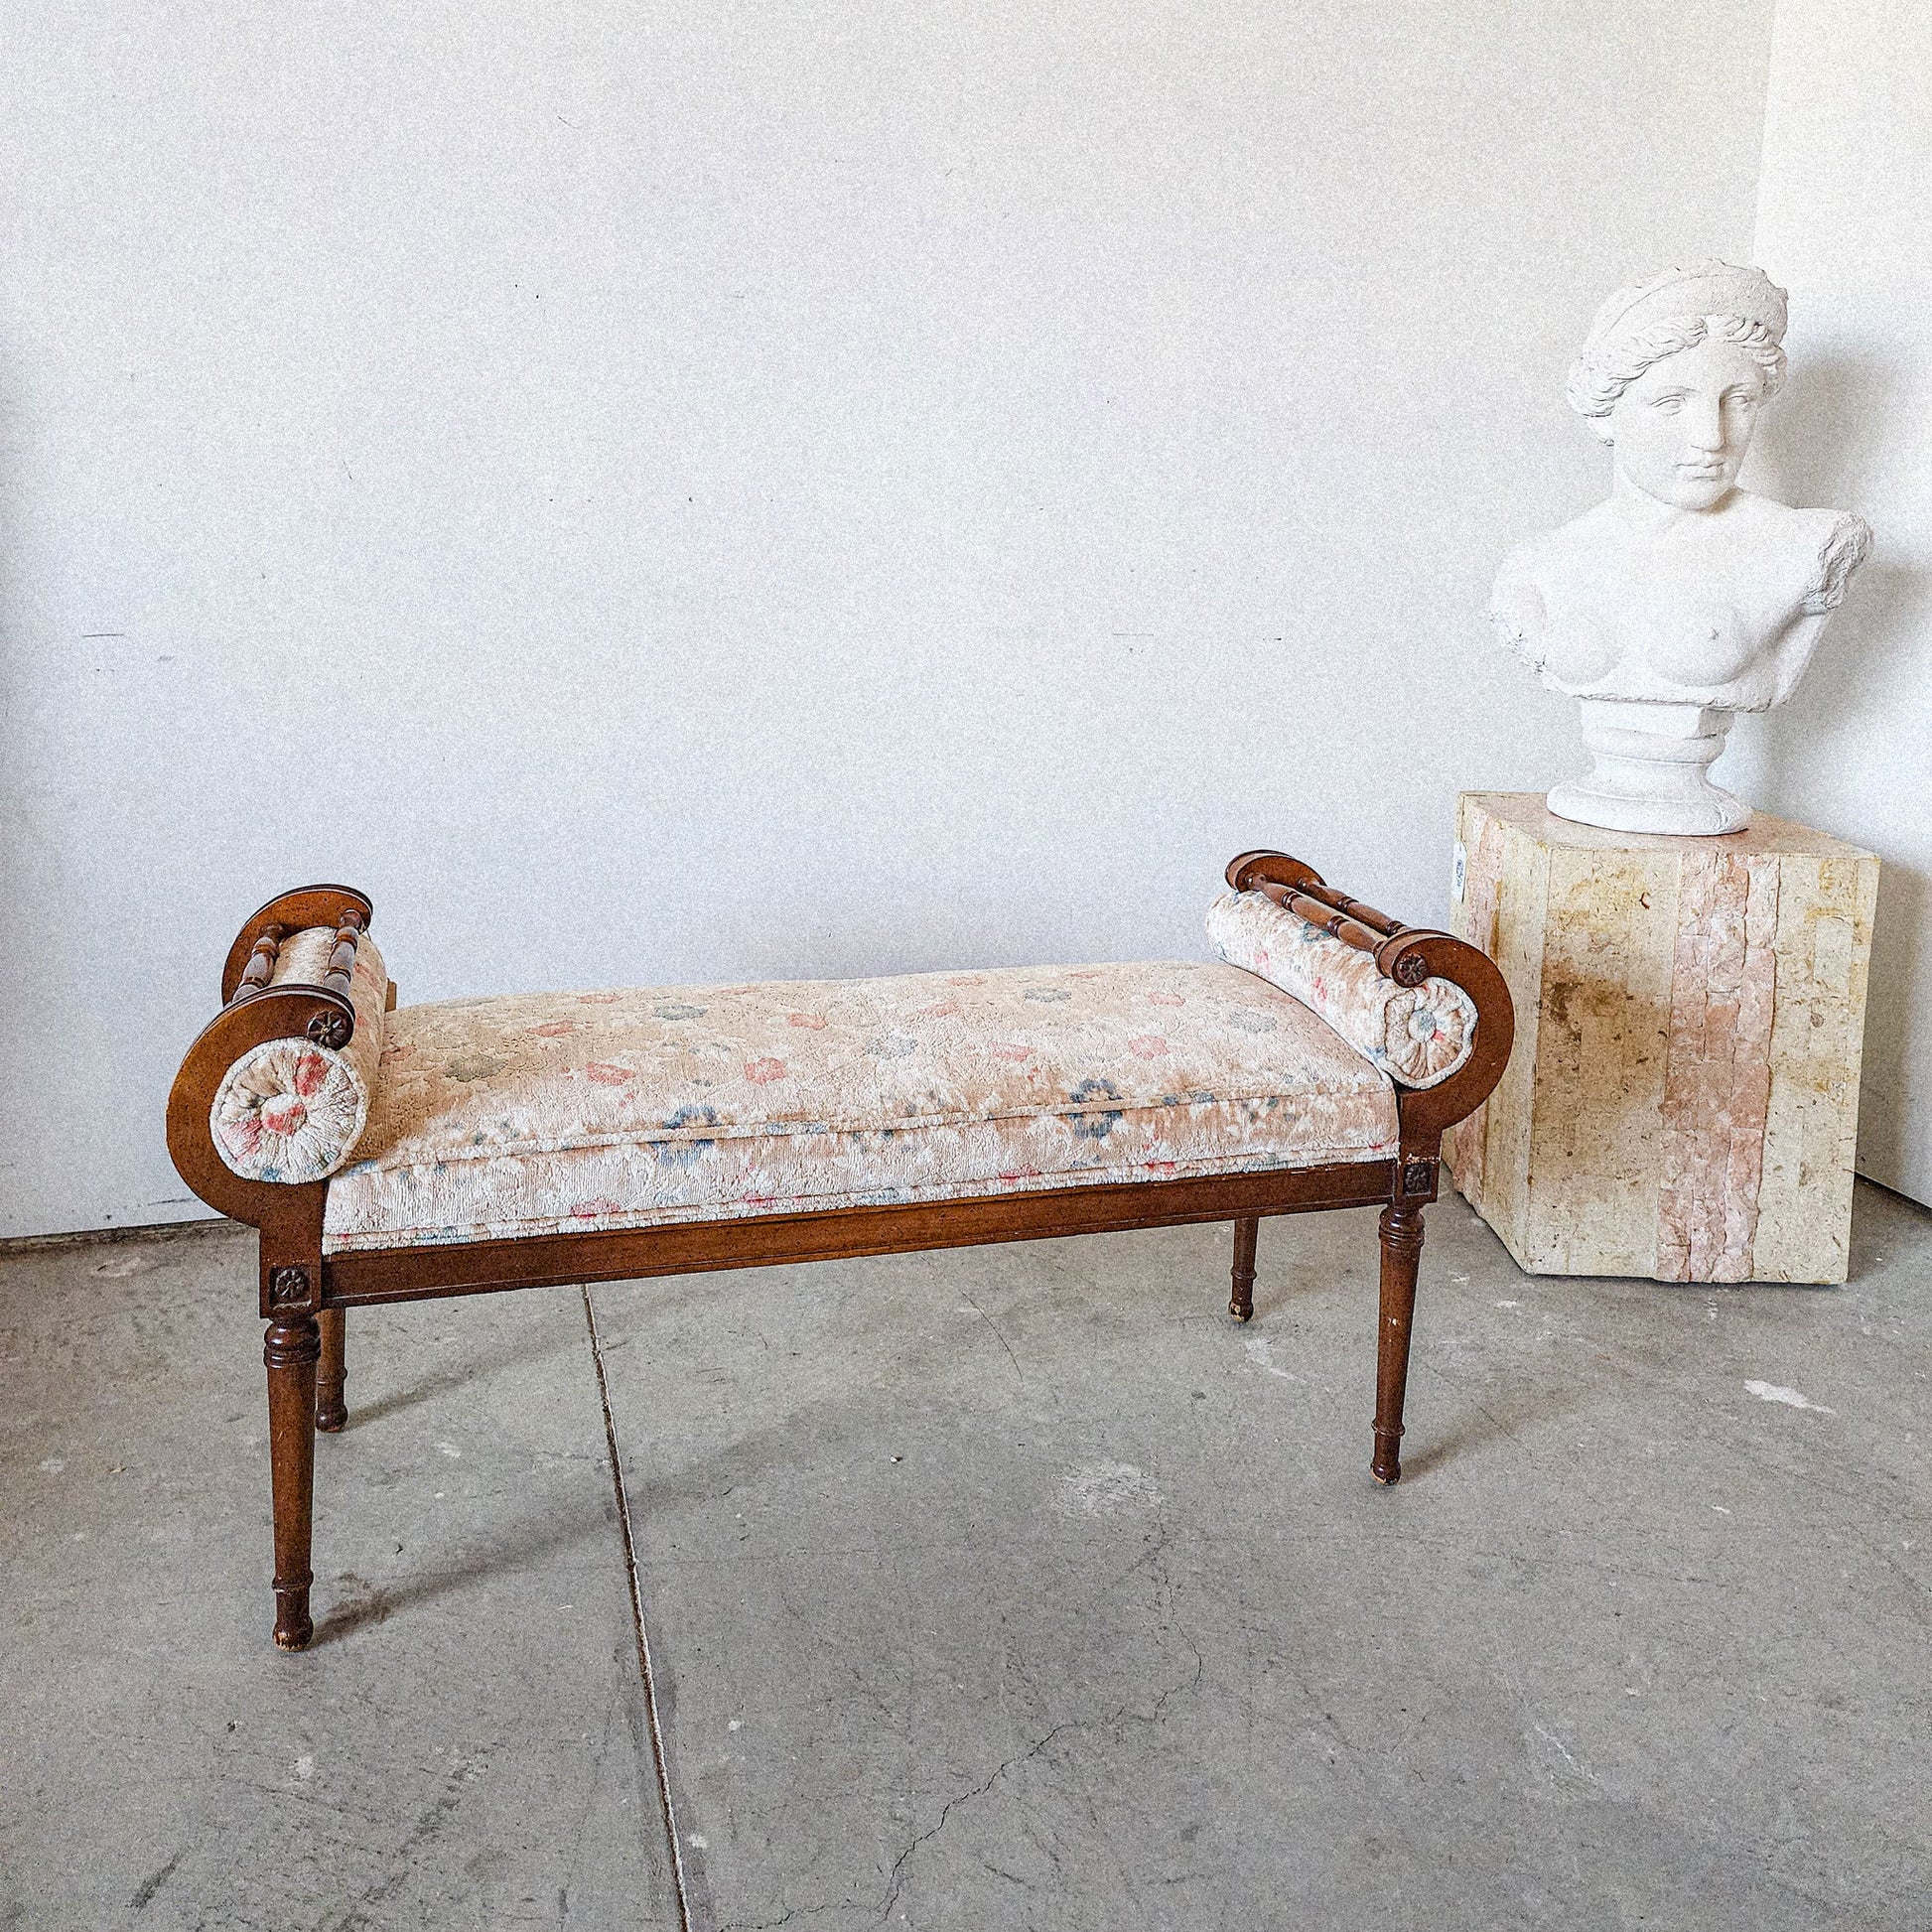 Vintage Scroll Shaped Bench - Reclaimed Mt. Goods